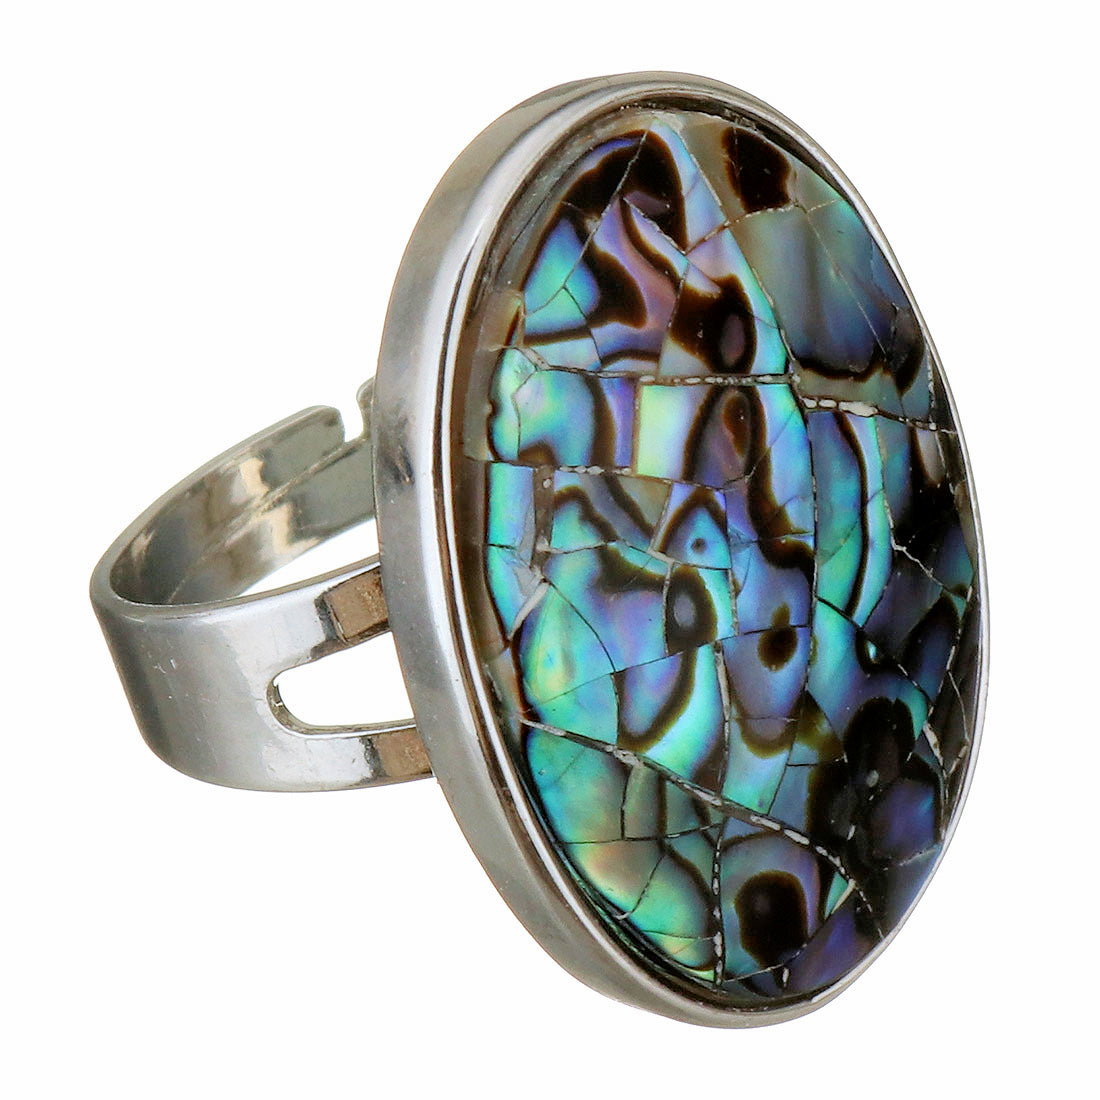 Abalone Shell Oval Brass Ring - Platinum Plated - 28mm Oval - Ring Size 7 - NEW920